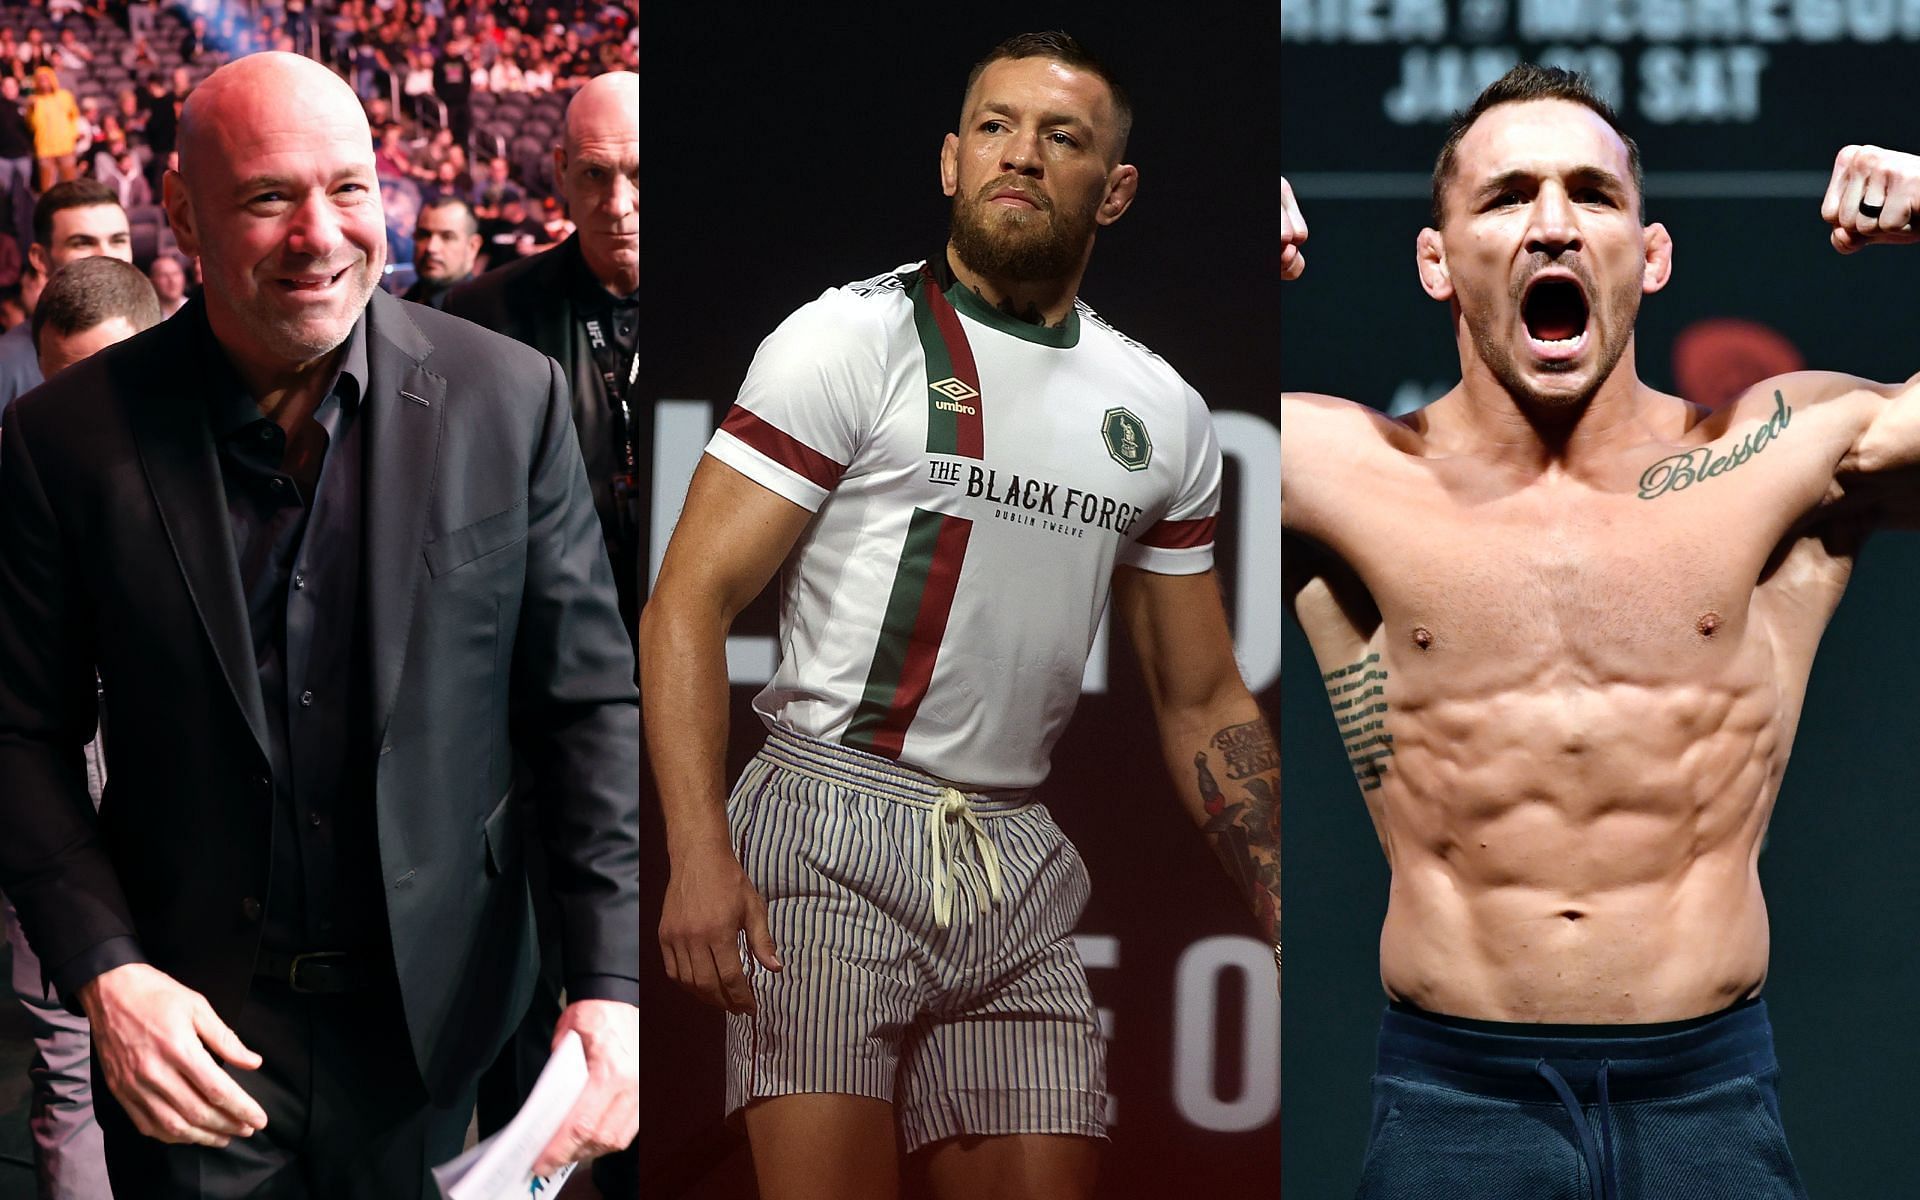 From the left- Dana White, Conor McGregor and Michael Chandler [Image credits: Getty Images]